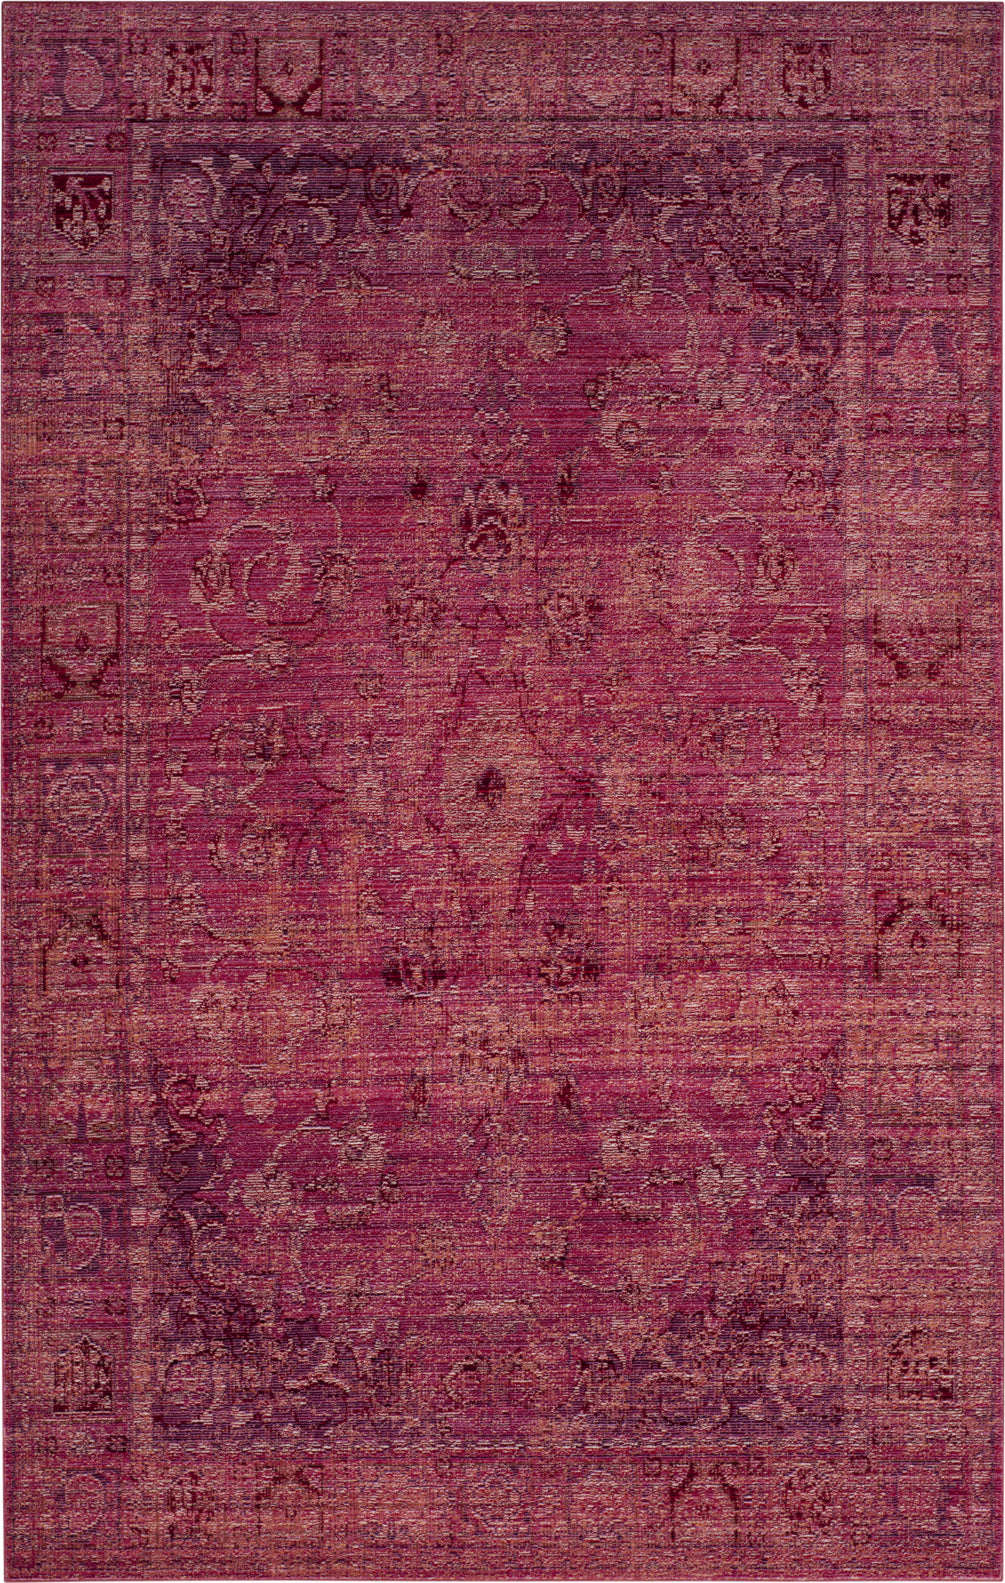 Safavieh Valencia VAL103R Red/Red Area Rug main image